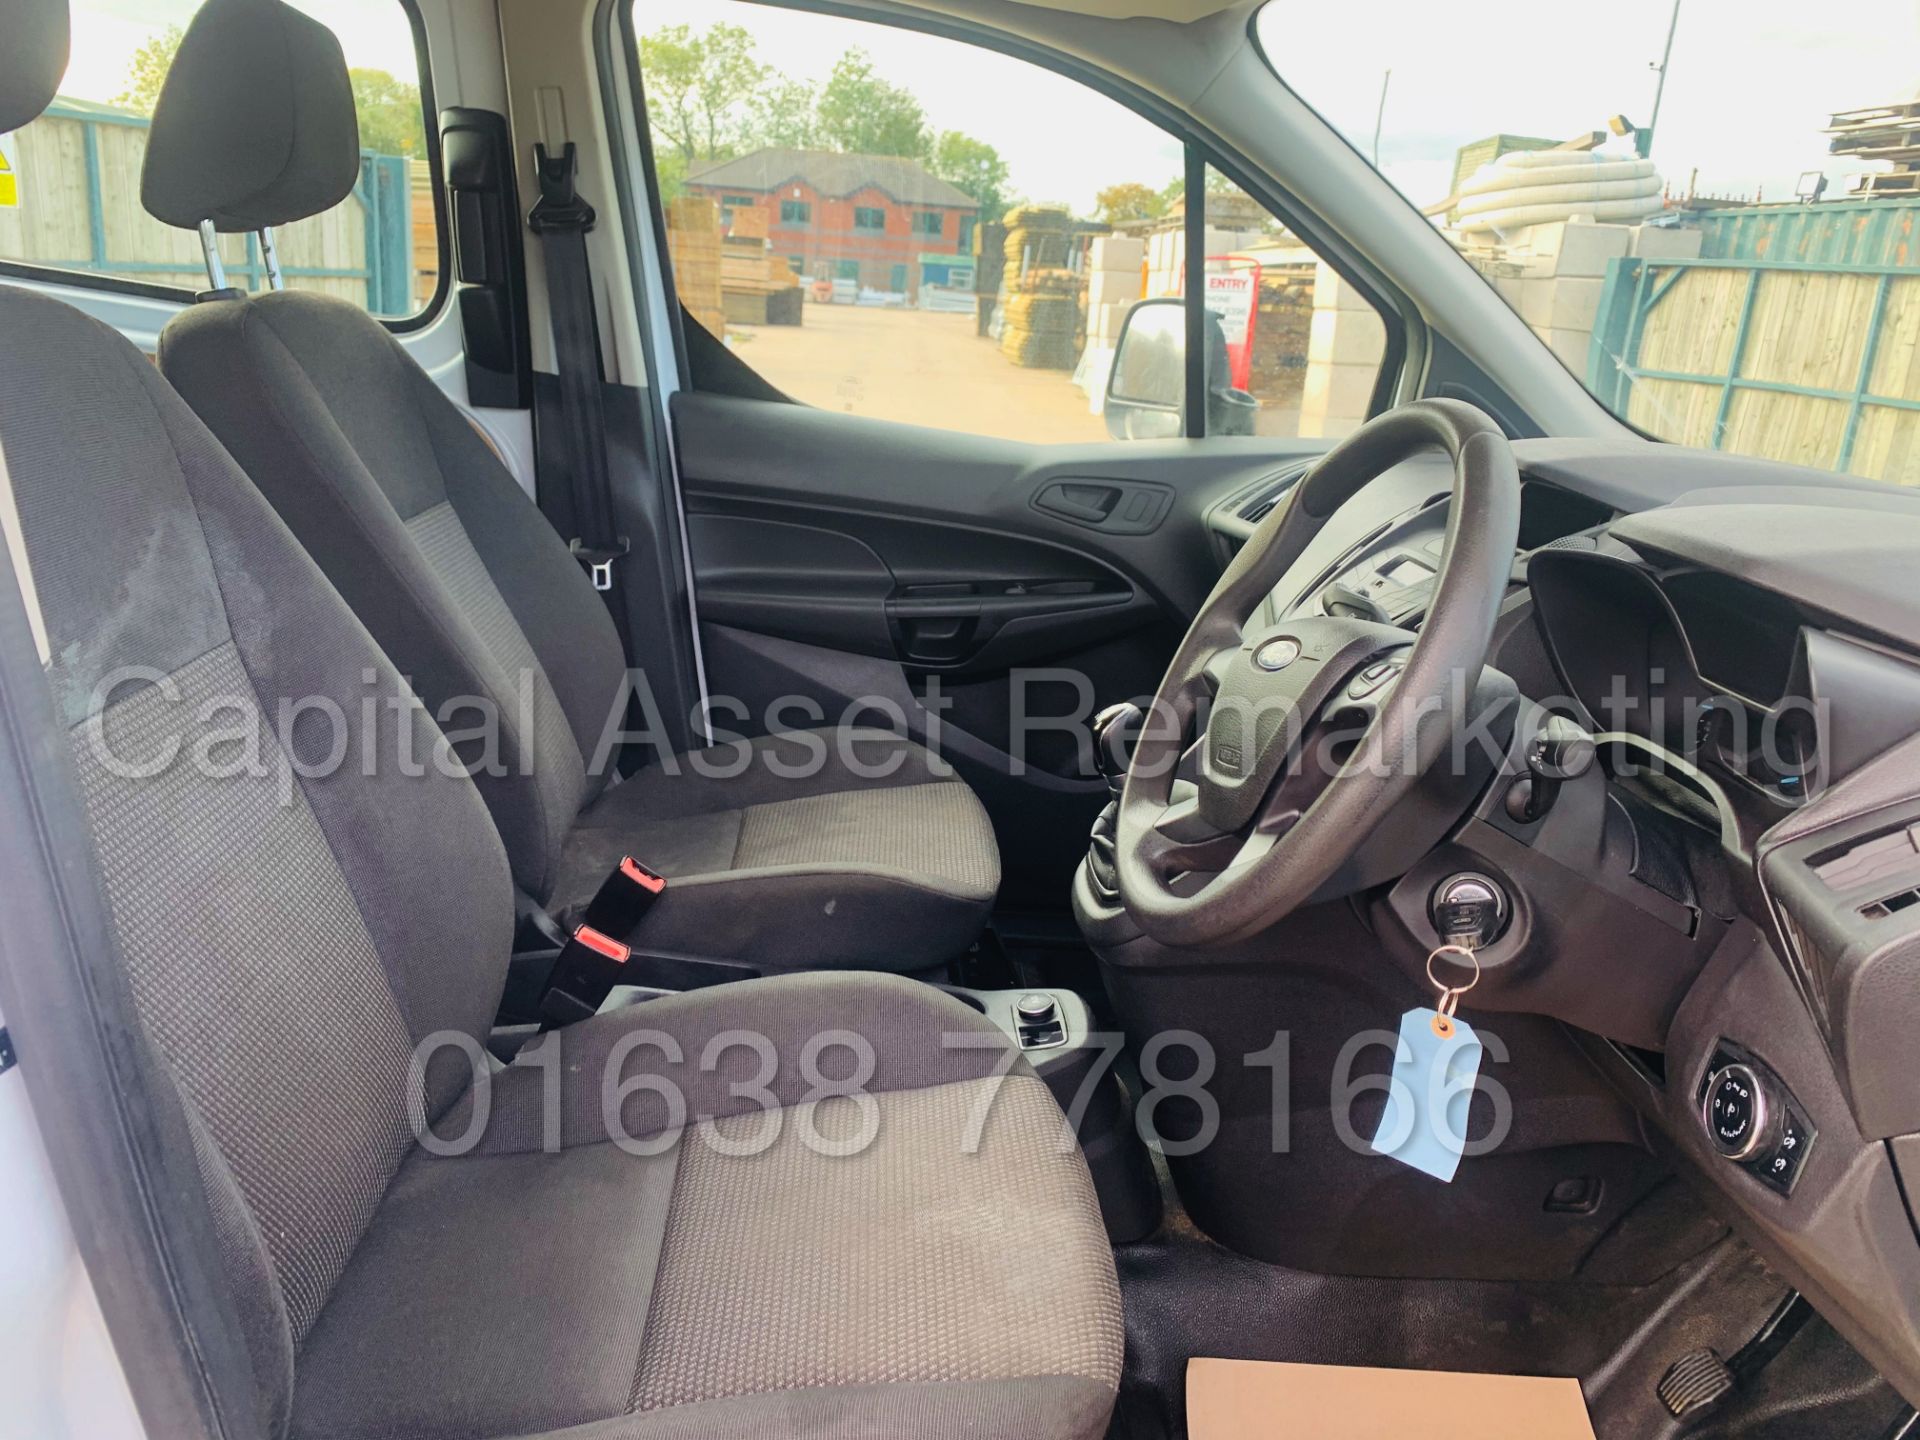 FORD TRANSIT CONNECT *LWB - 5 SEATER CREW VAN* (2018 - EURO 6) 1.5 TDCI *AIR CON* (1 OWNER) - Image 29 of 40